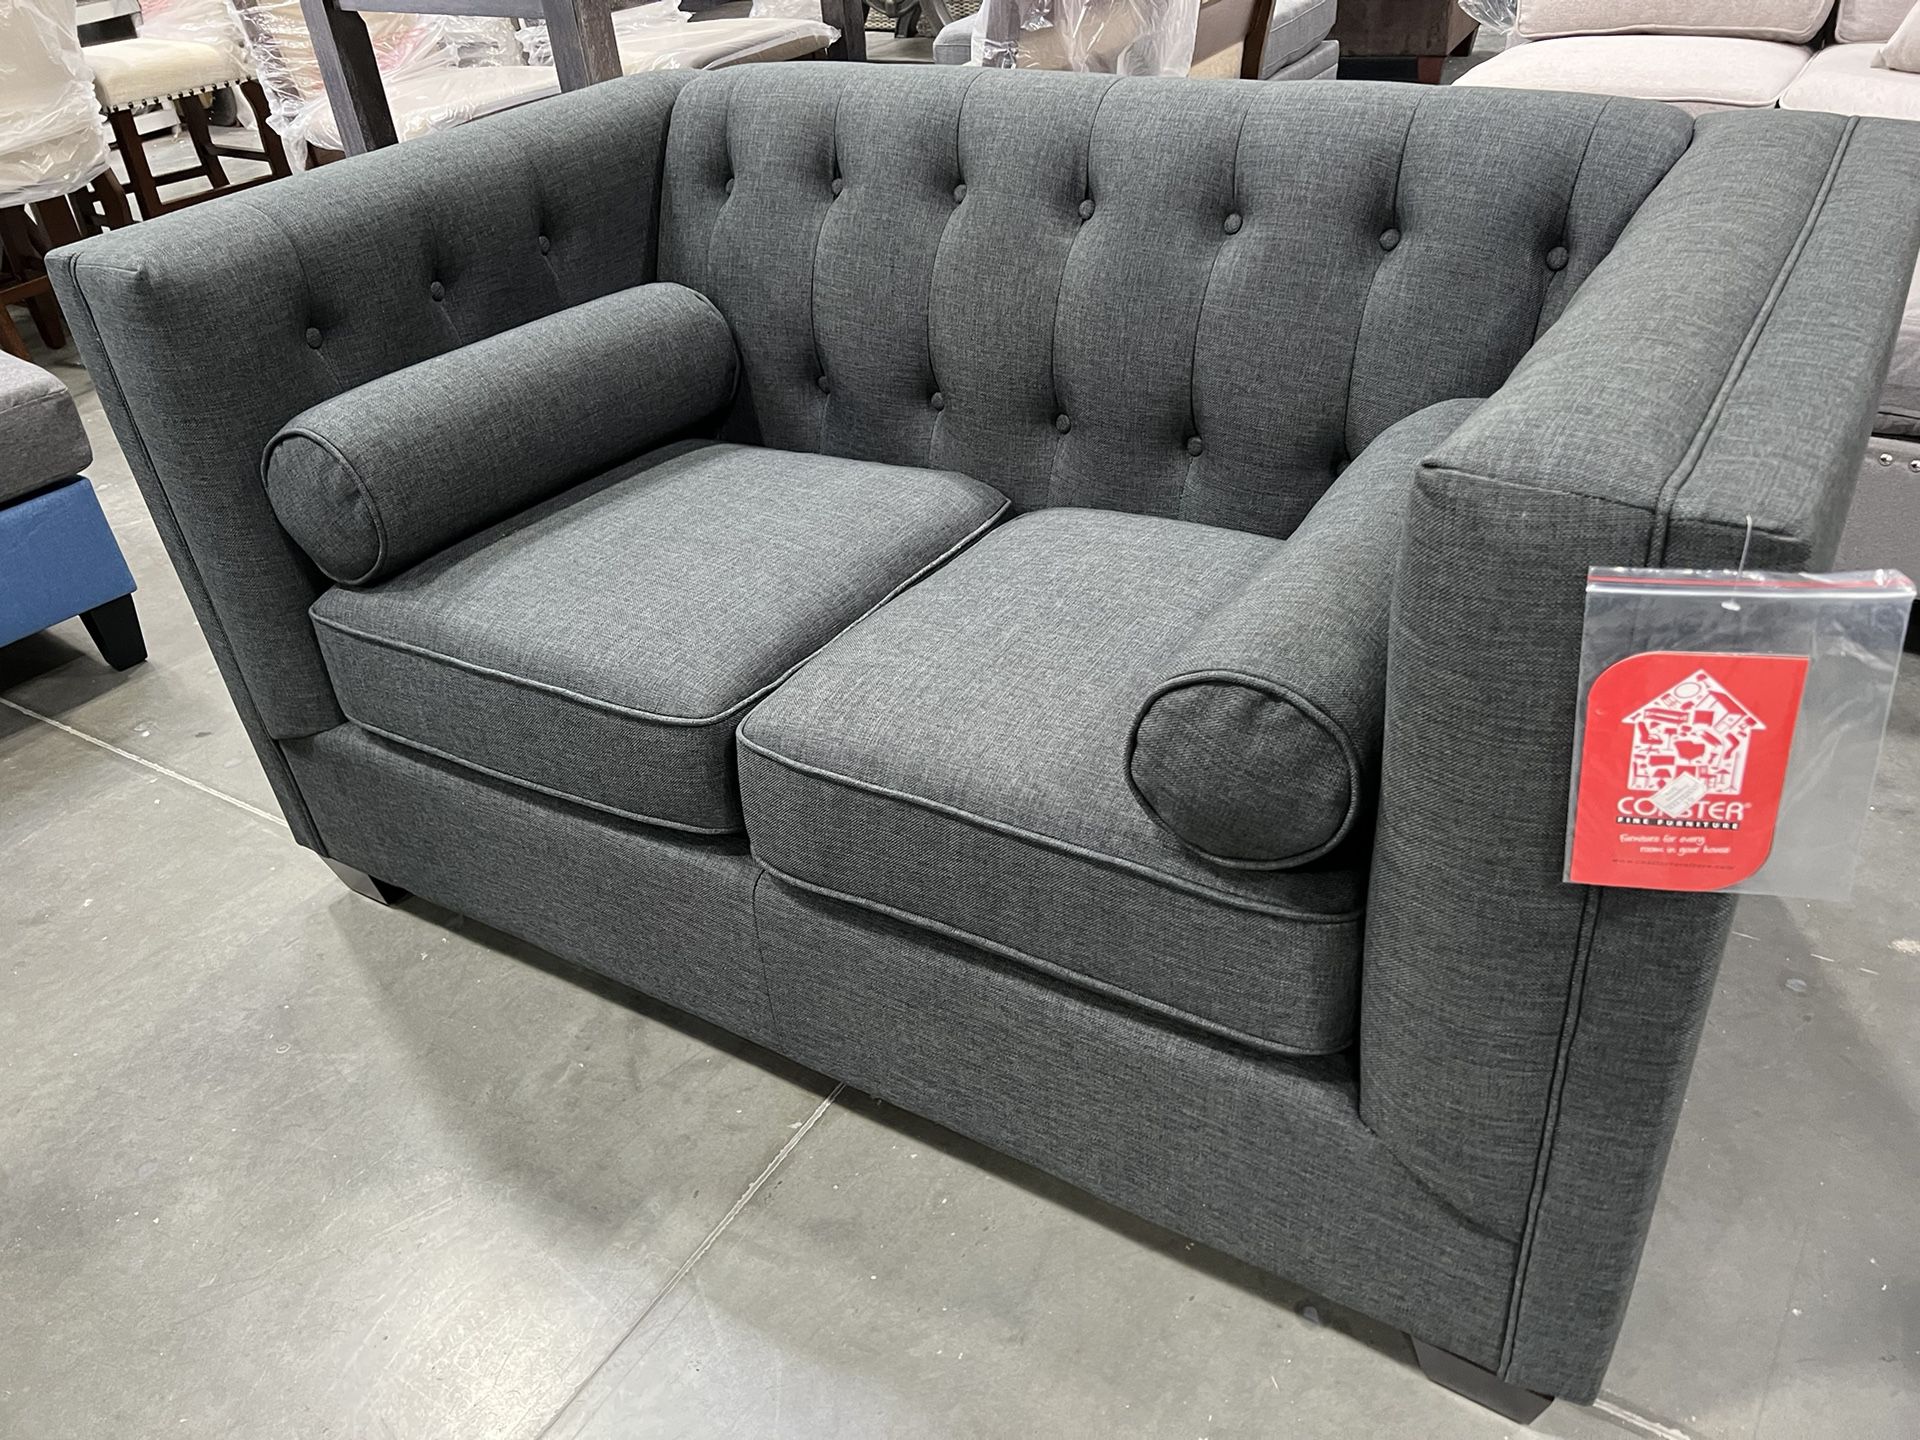 !! !New!!! Stylish Charcoal Loveseat, Grey Loveseat, Couch, Upholstered Couch, Sofa, Loveseat With Accent Pillows, Comfortable Couch